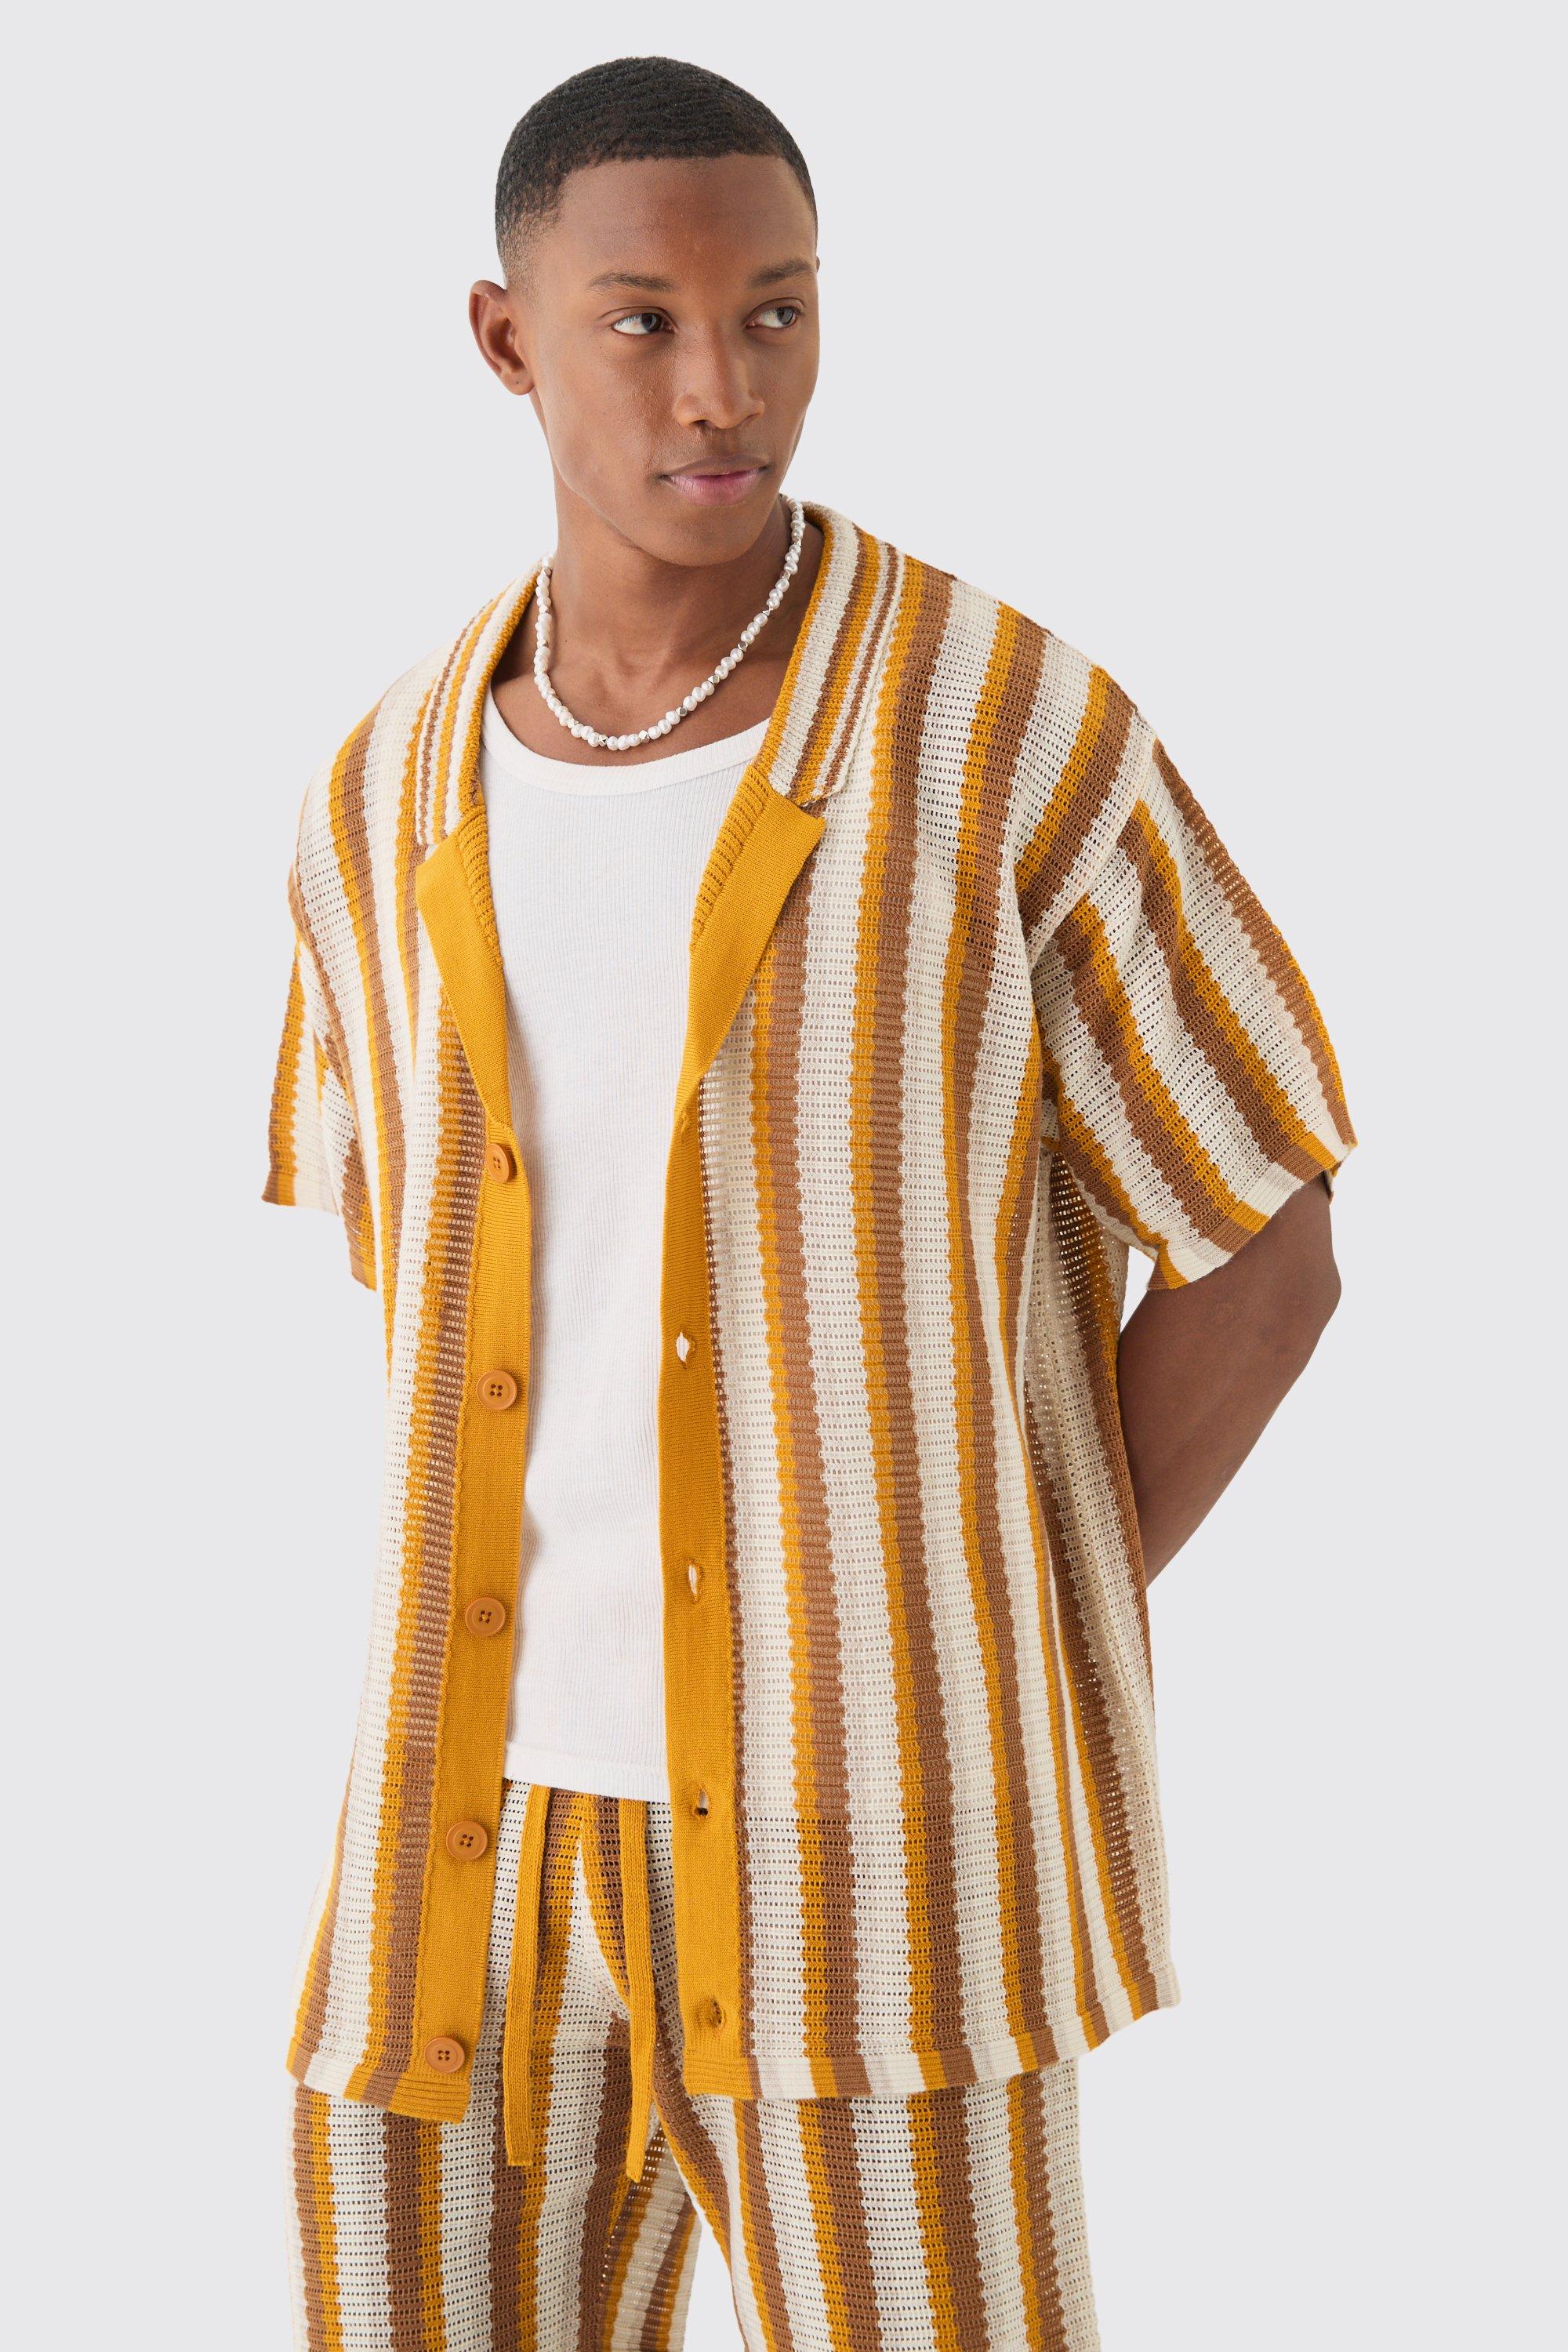 Image of Oversized Open Stitch Stripe Knit Shirt In Mustard, Giallo